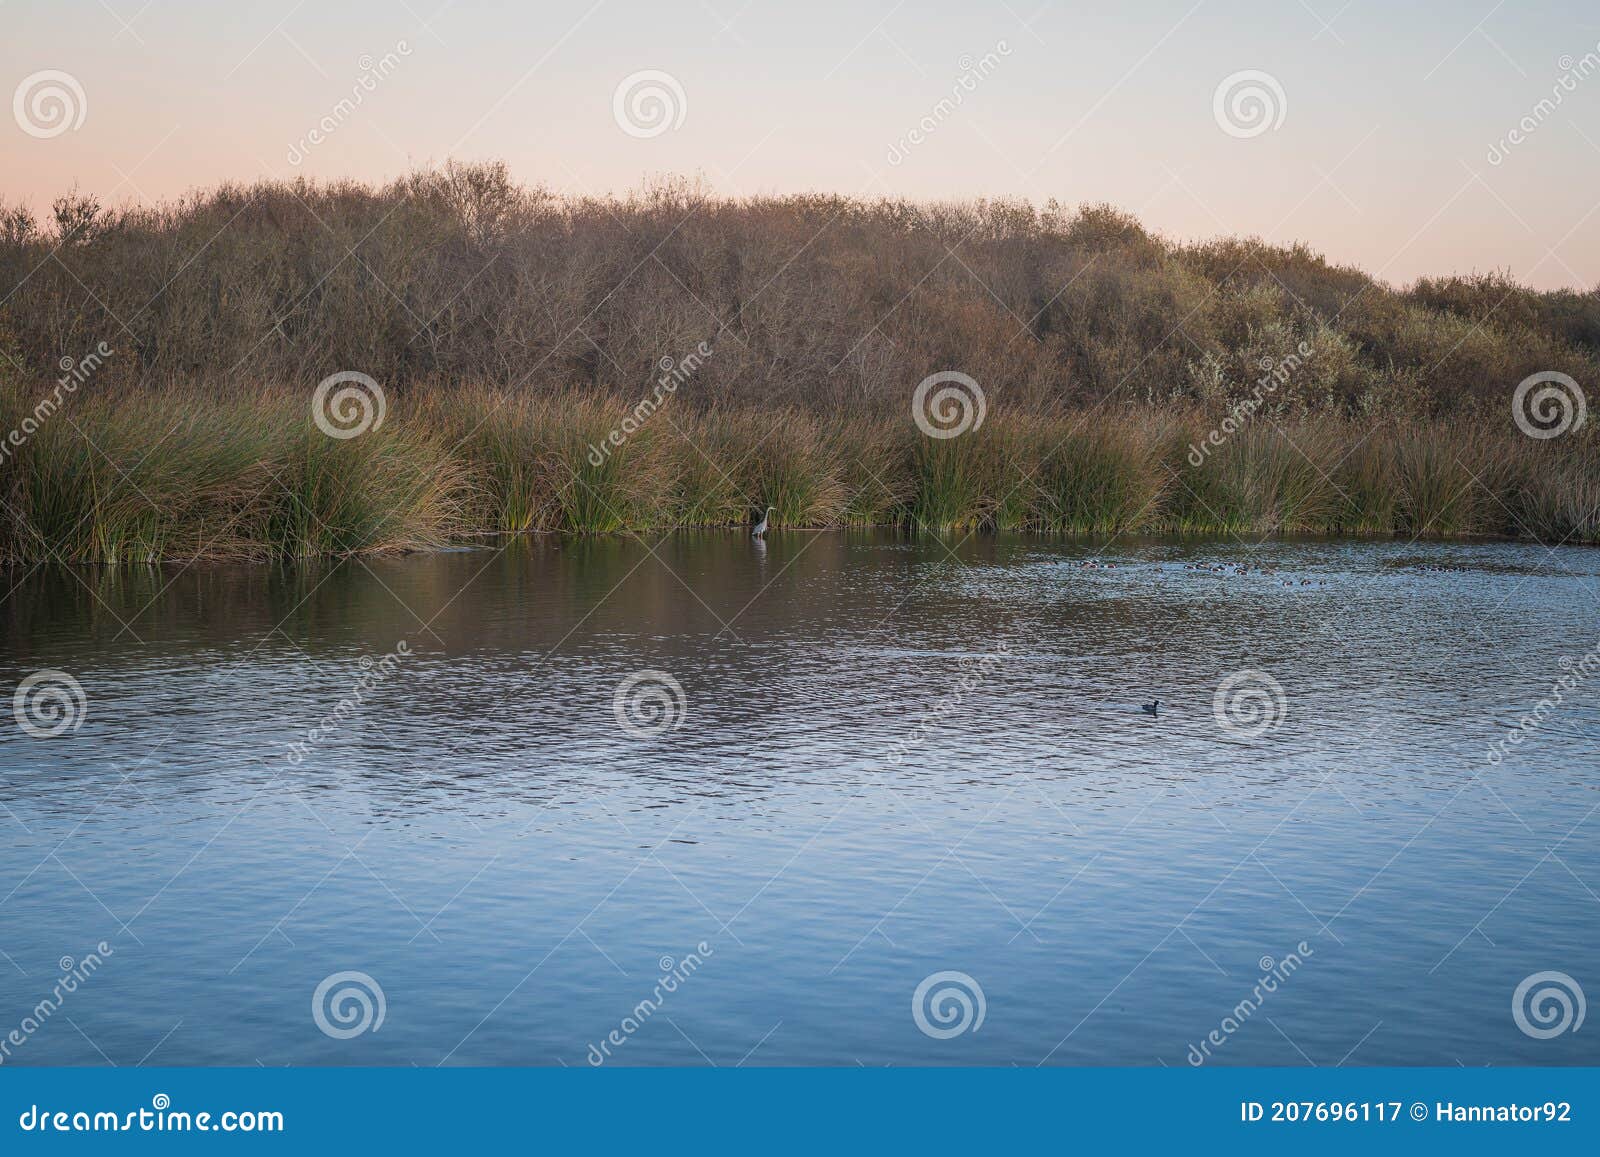 oso flaco lake at sunset, and birds.